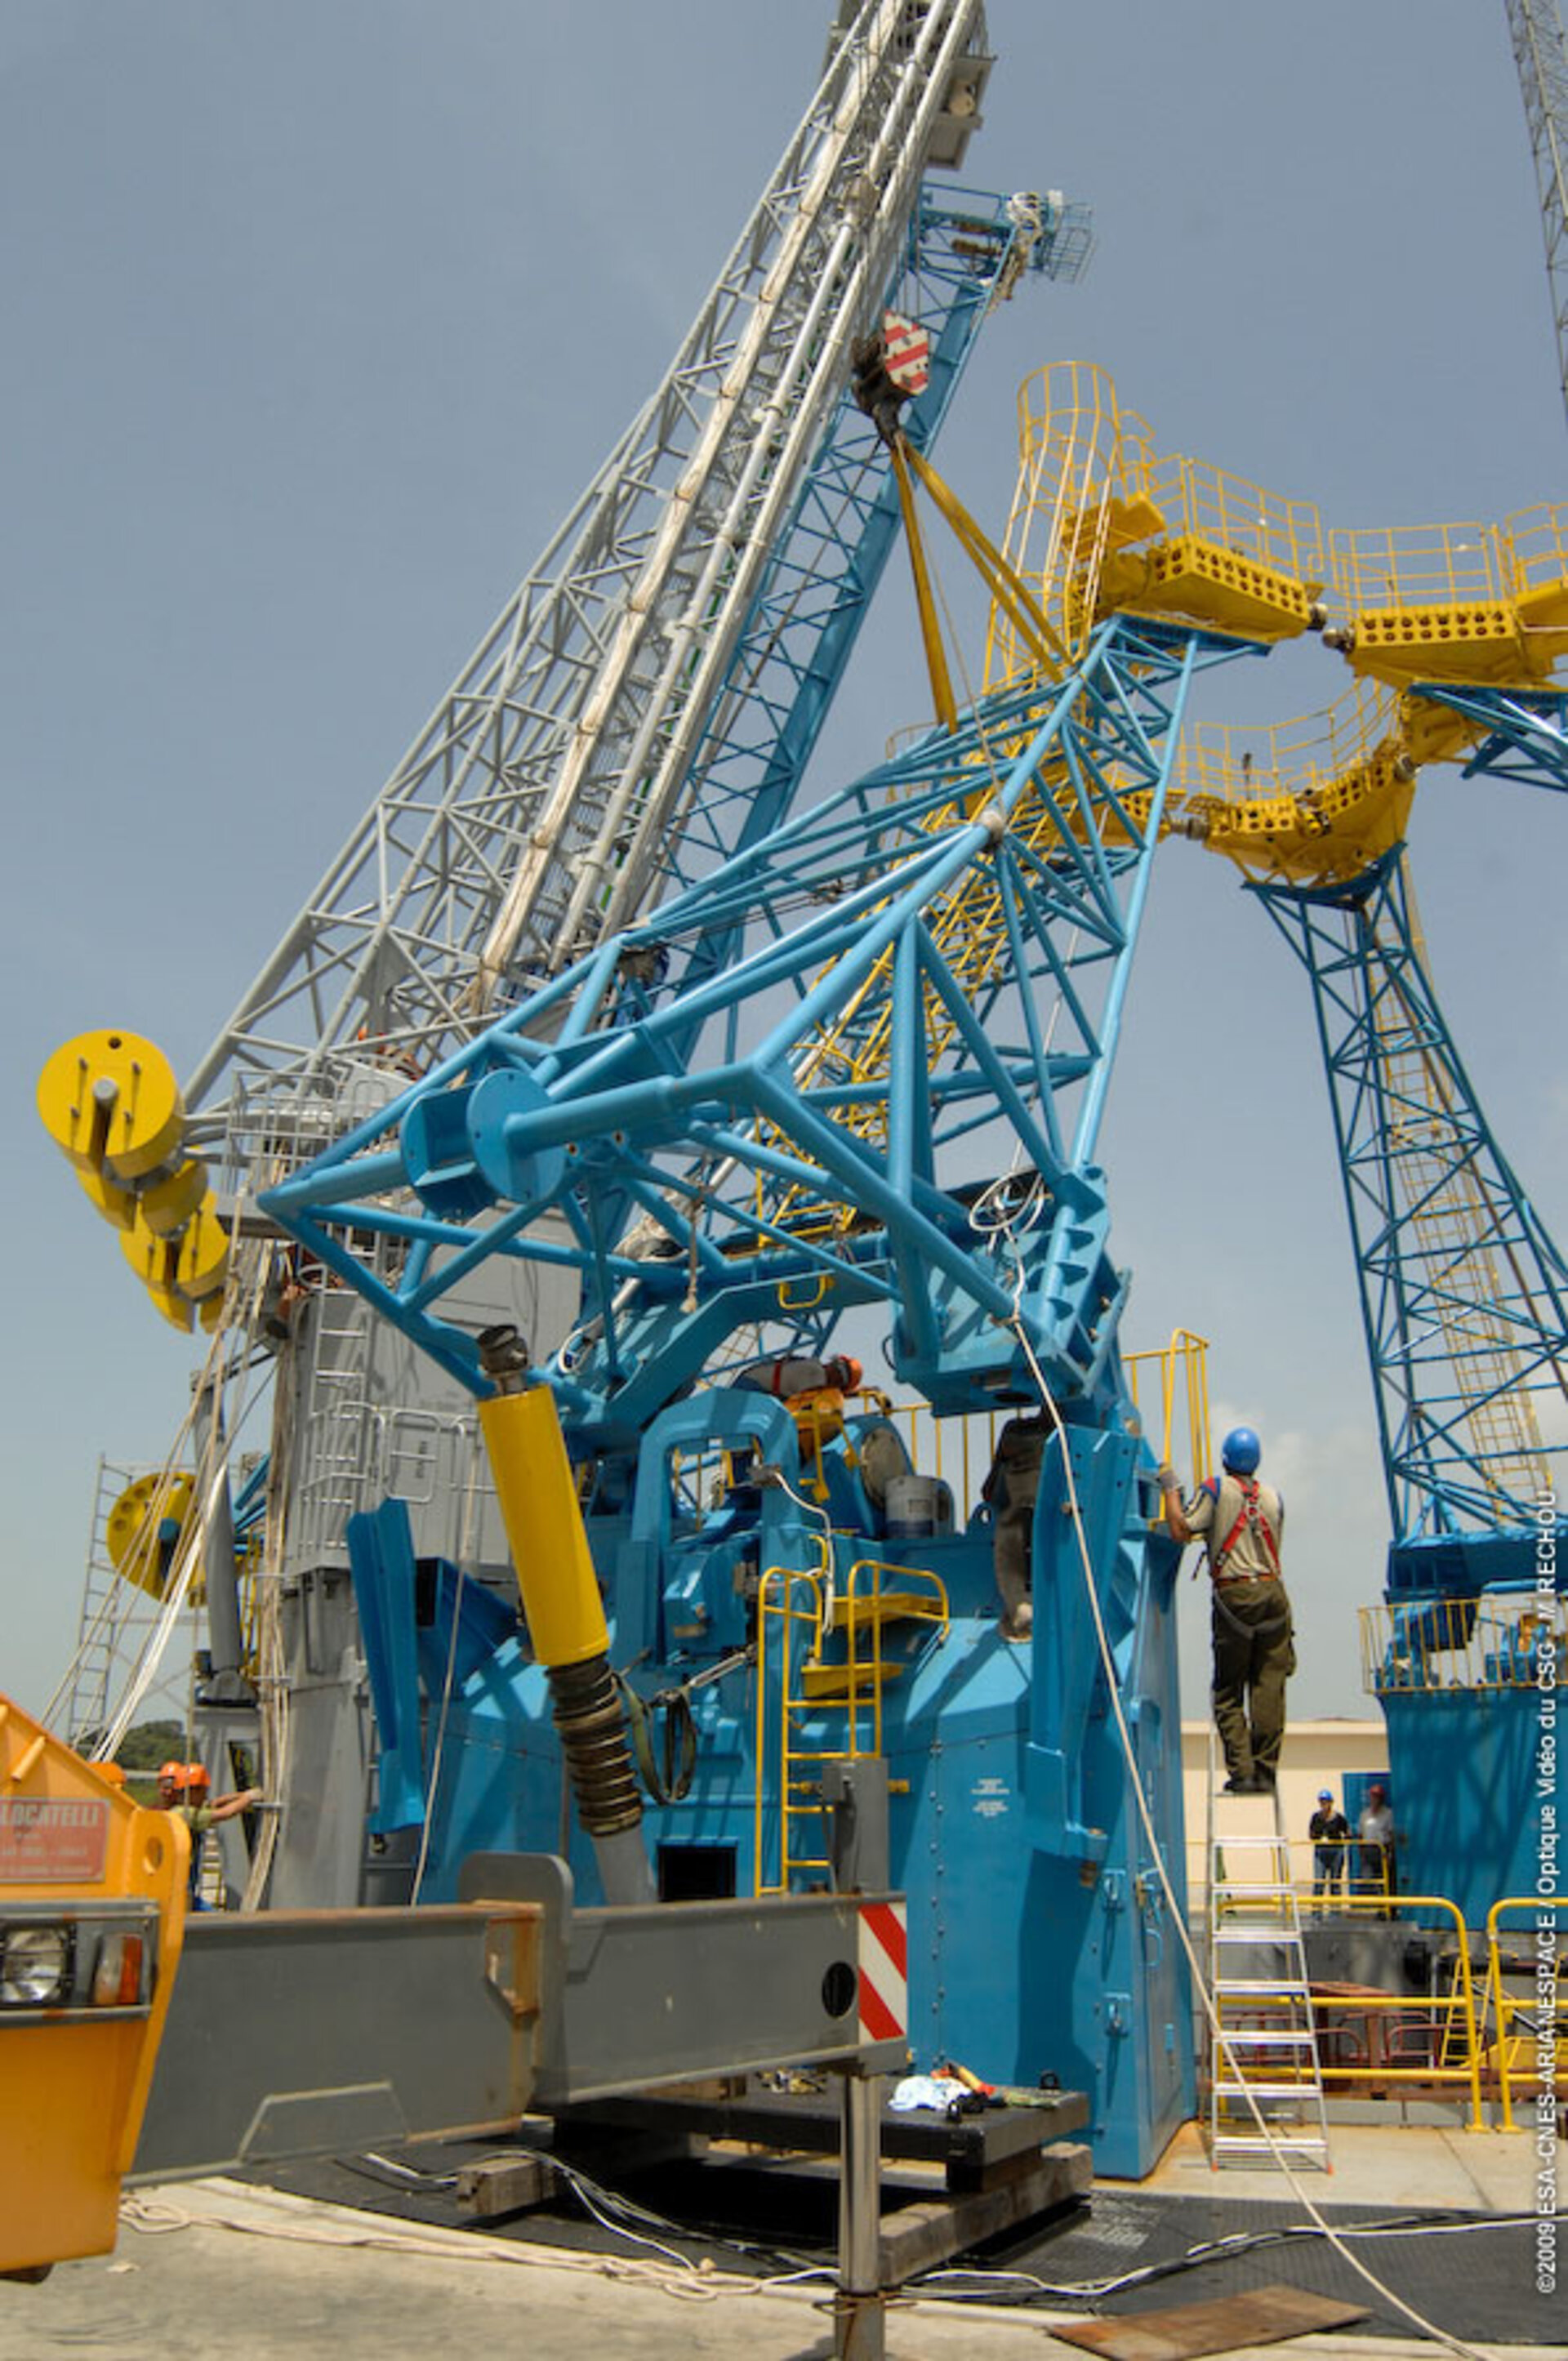 Soyuz launch pad – primary support arms